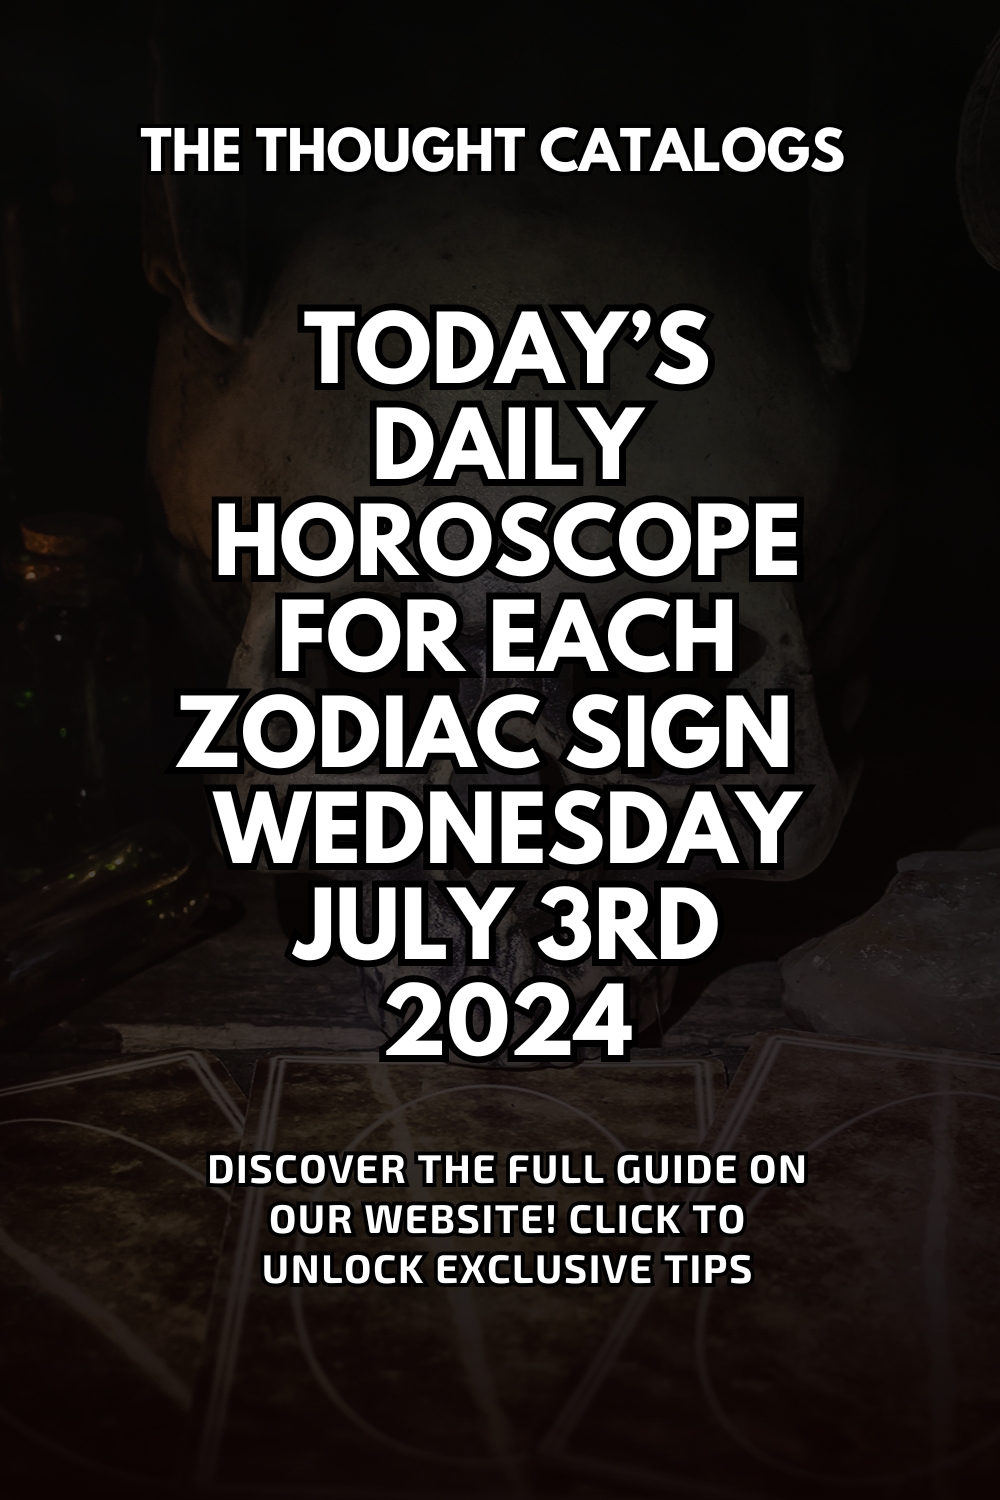 Today’s Daily Horoscope For Each Zodiac Sign: Wednesday , July 3rd, 2024